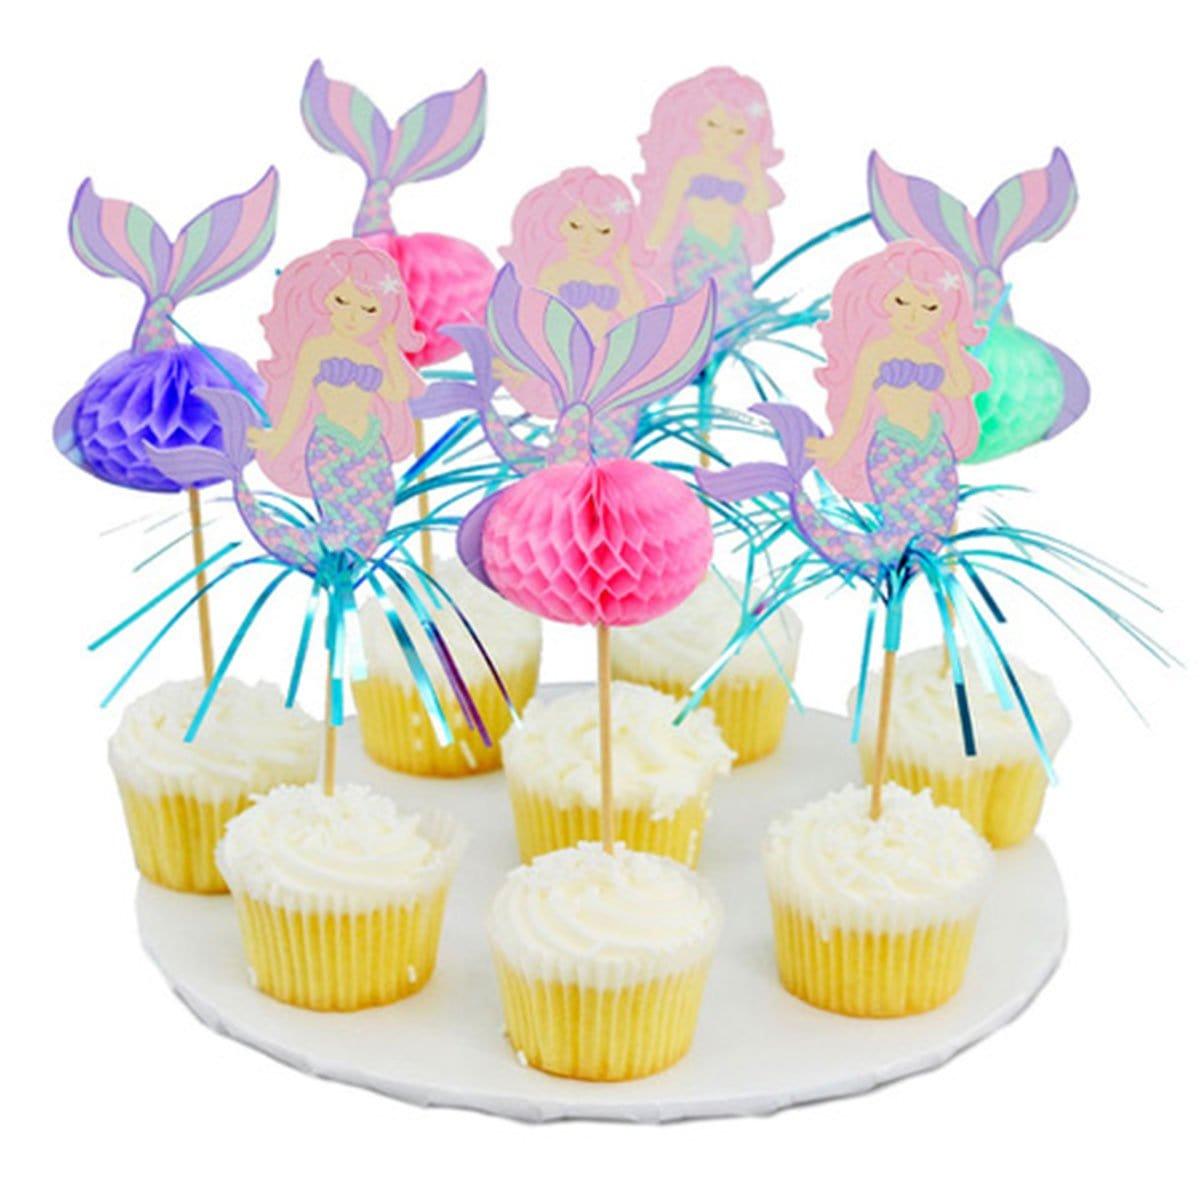 Buy Cake Supplies Party Picks, Mermaid, 8 Count sold at Party Expert